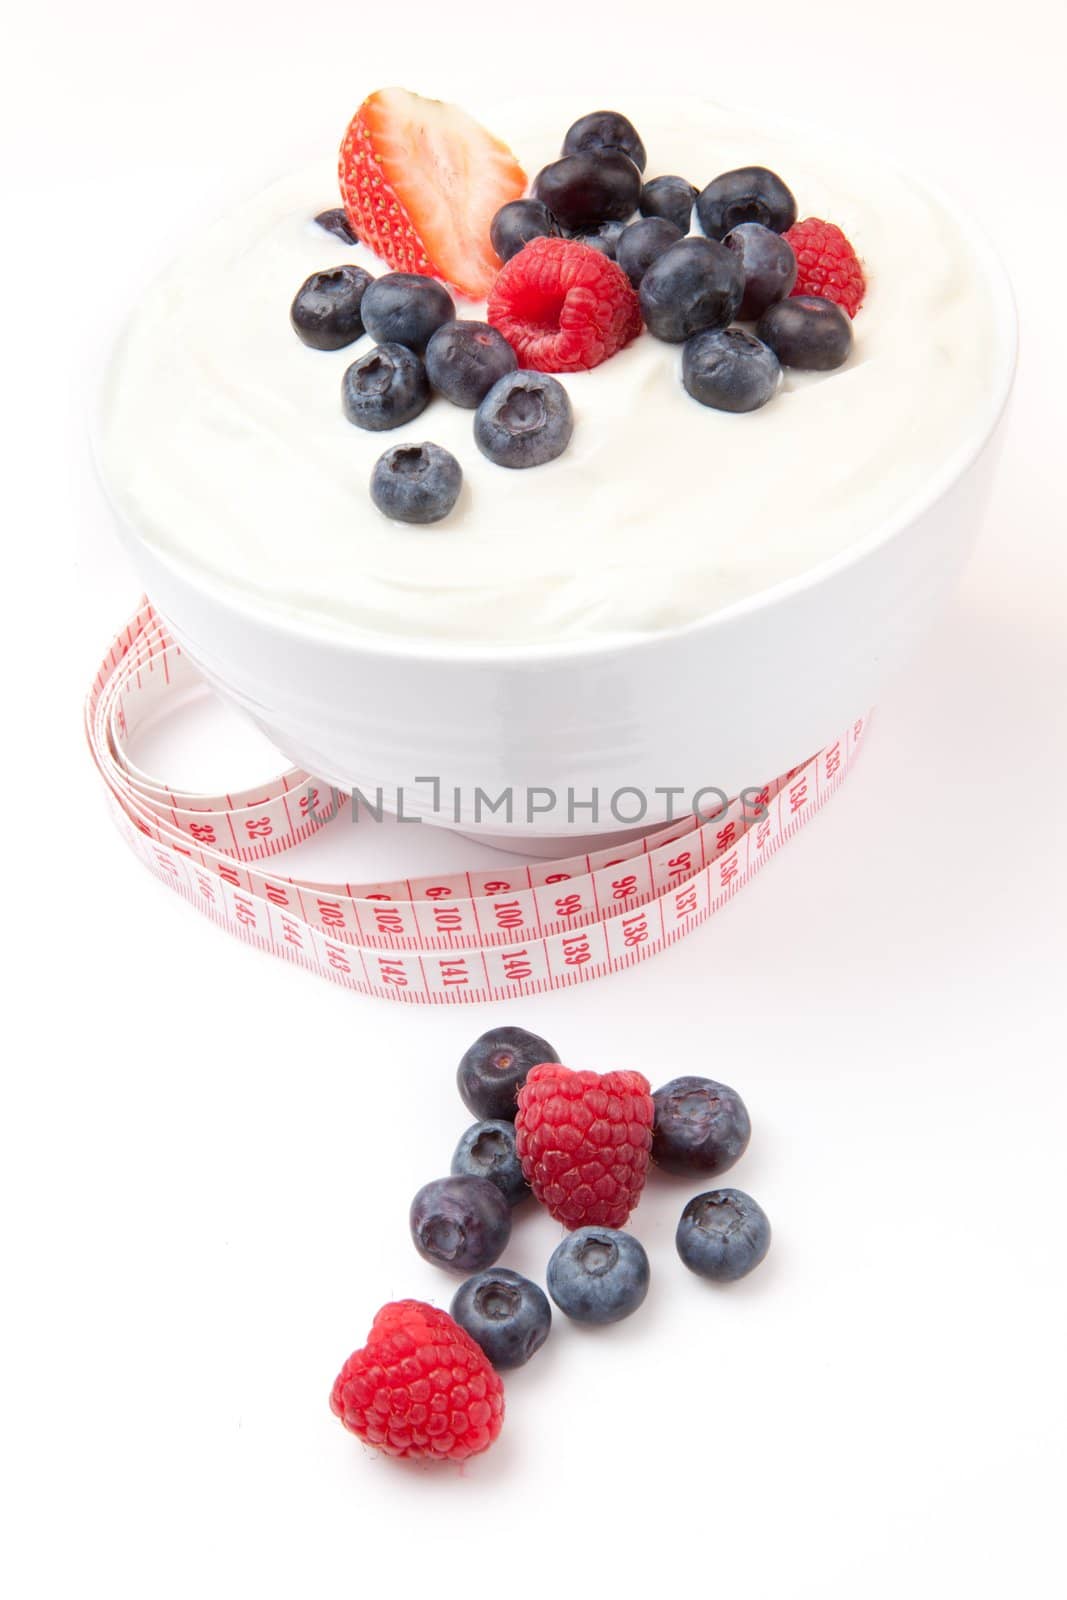 Tape measure and berries cream against a white background